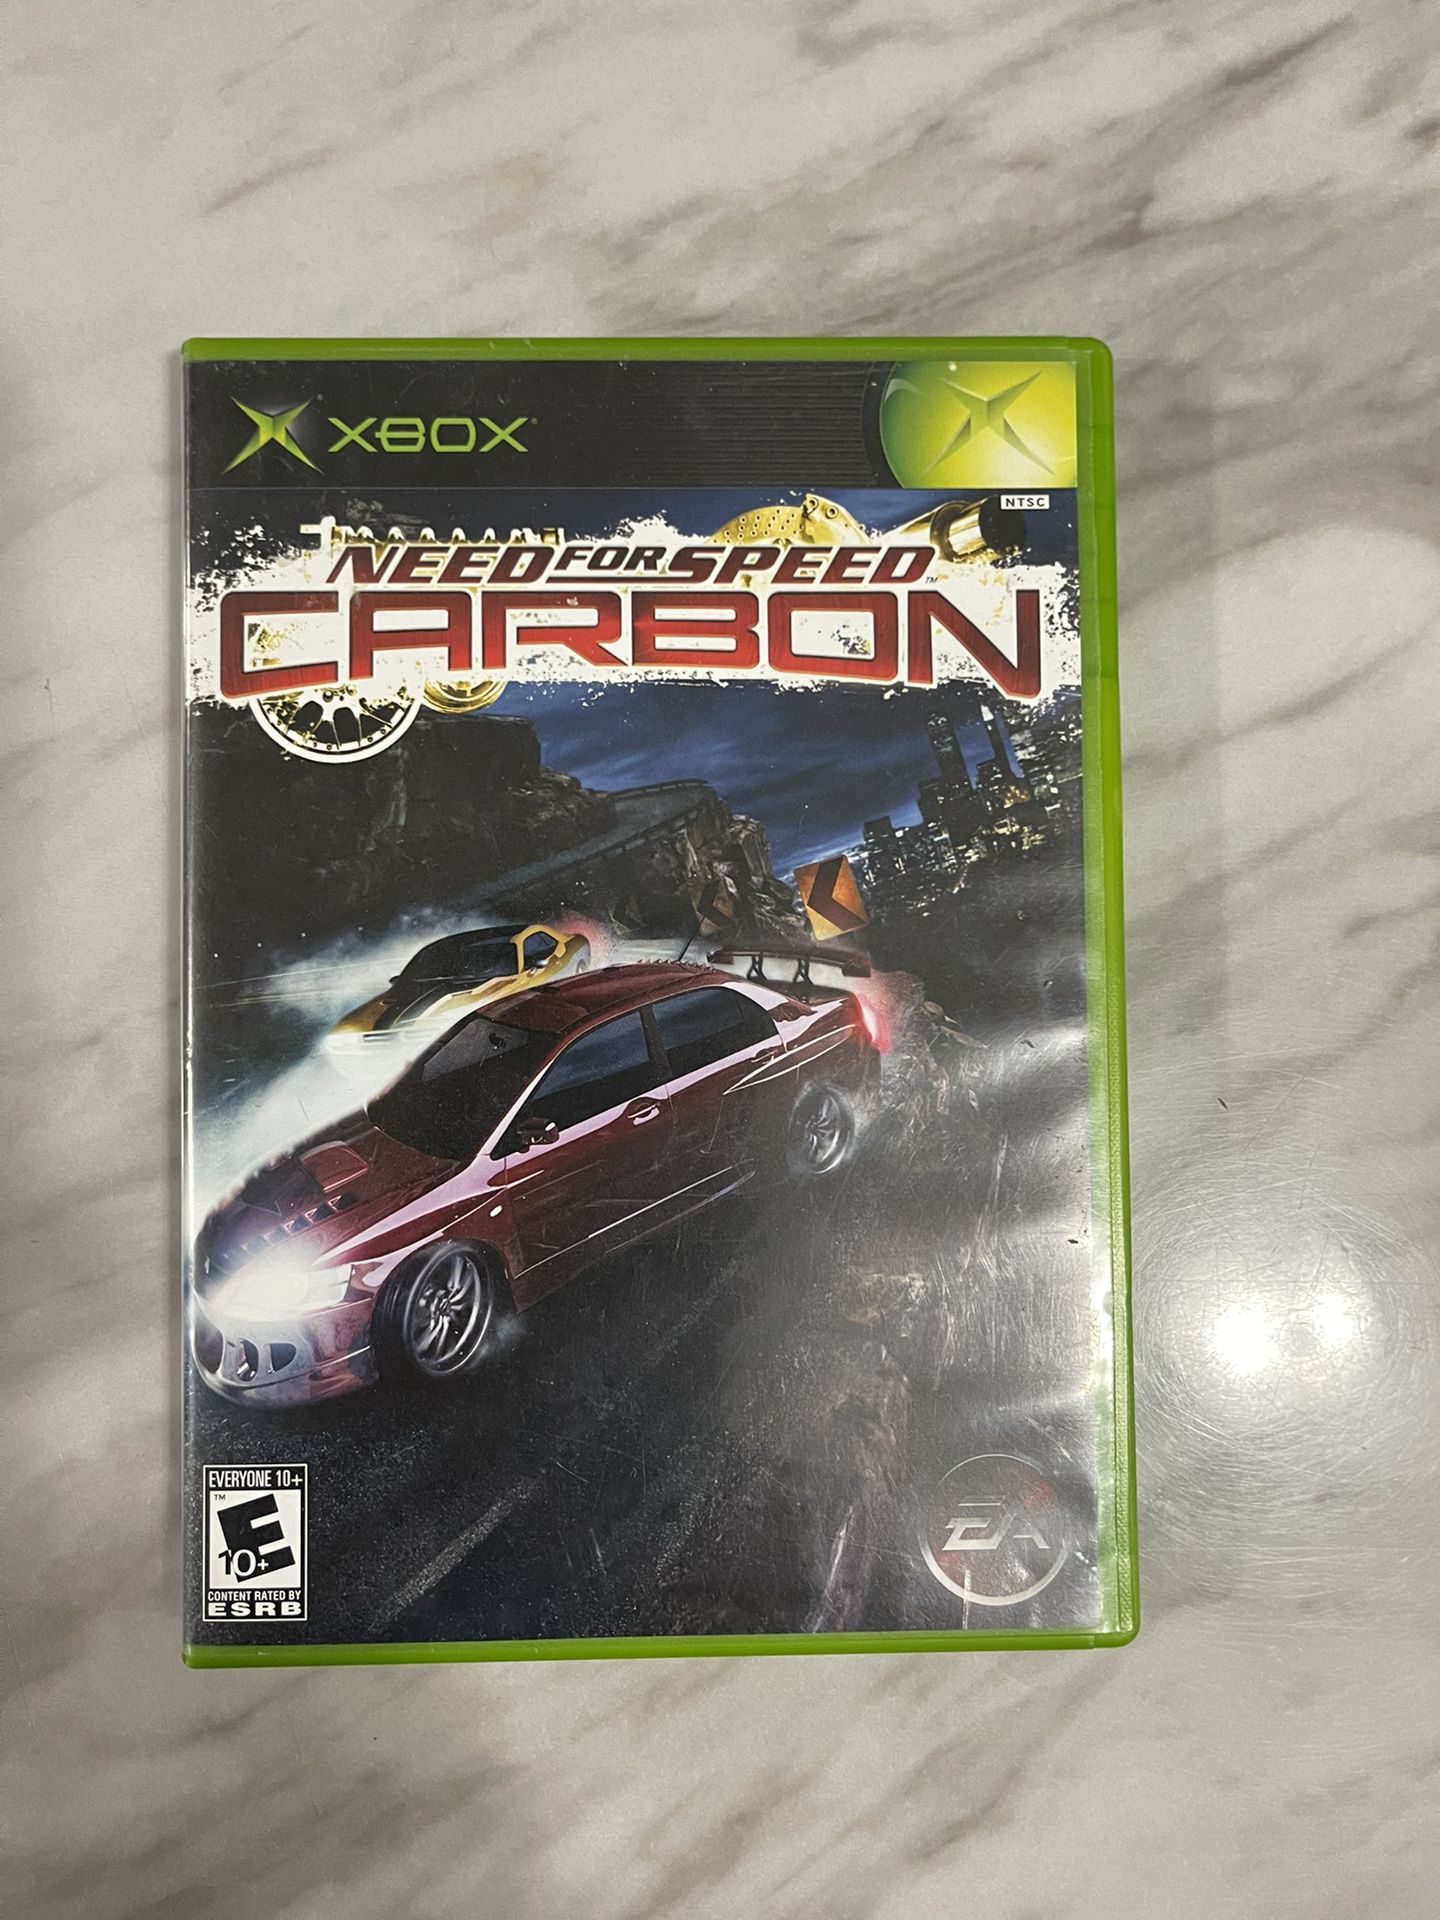 Xbox 360 Game Need For Speed Carbon